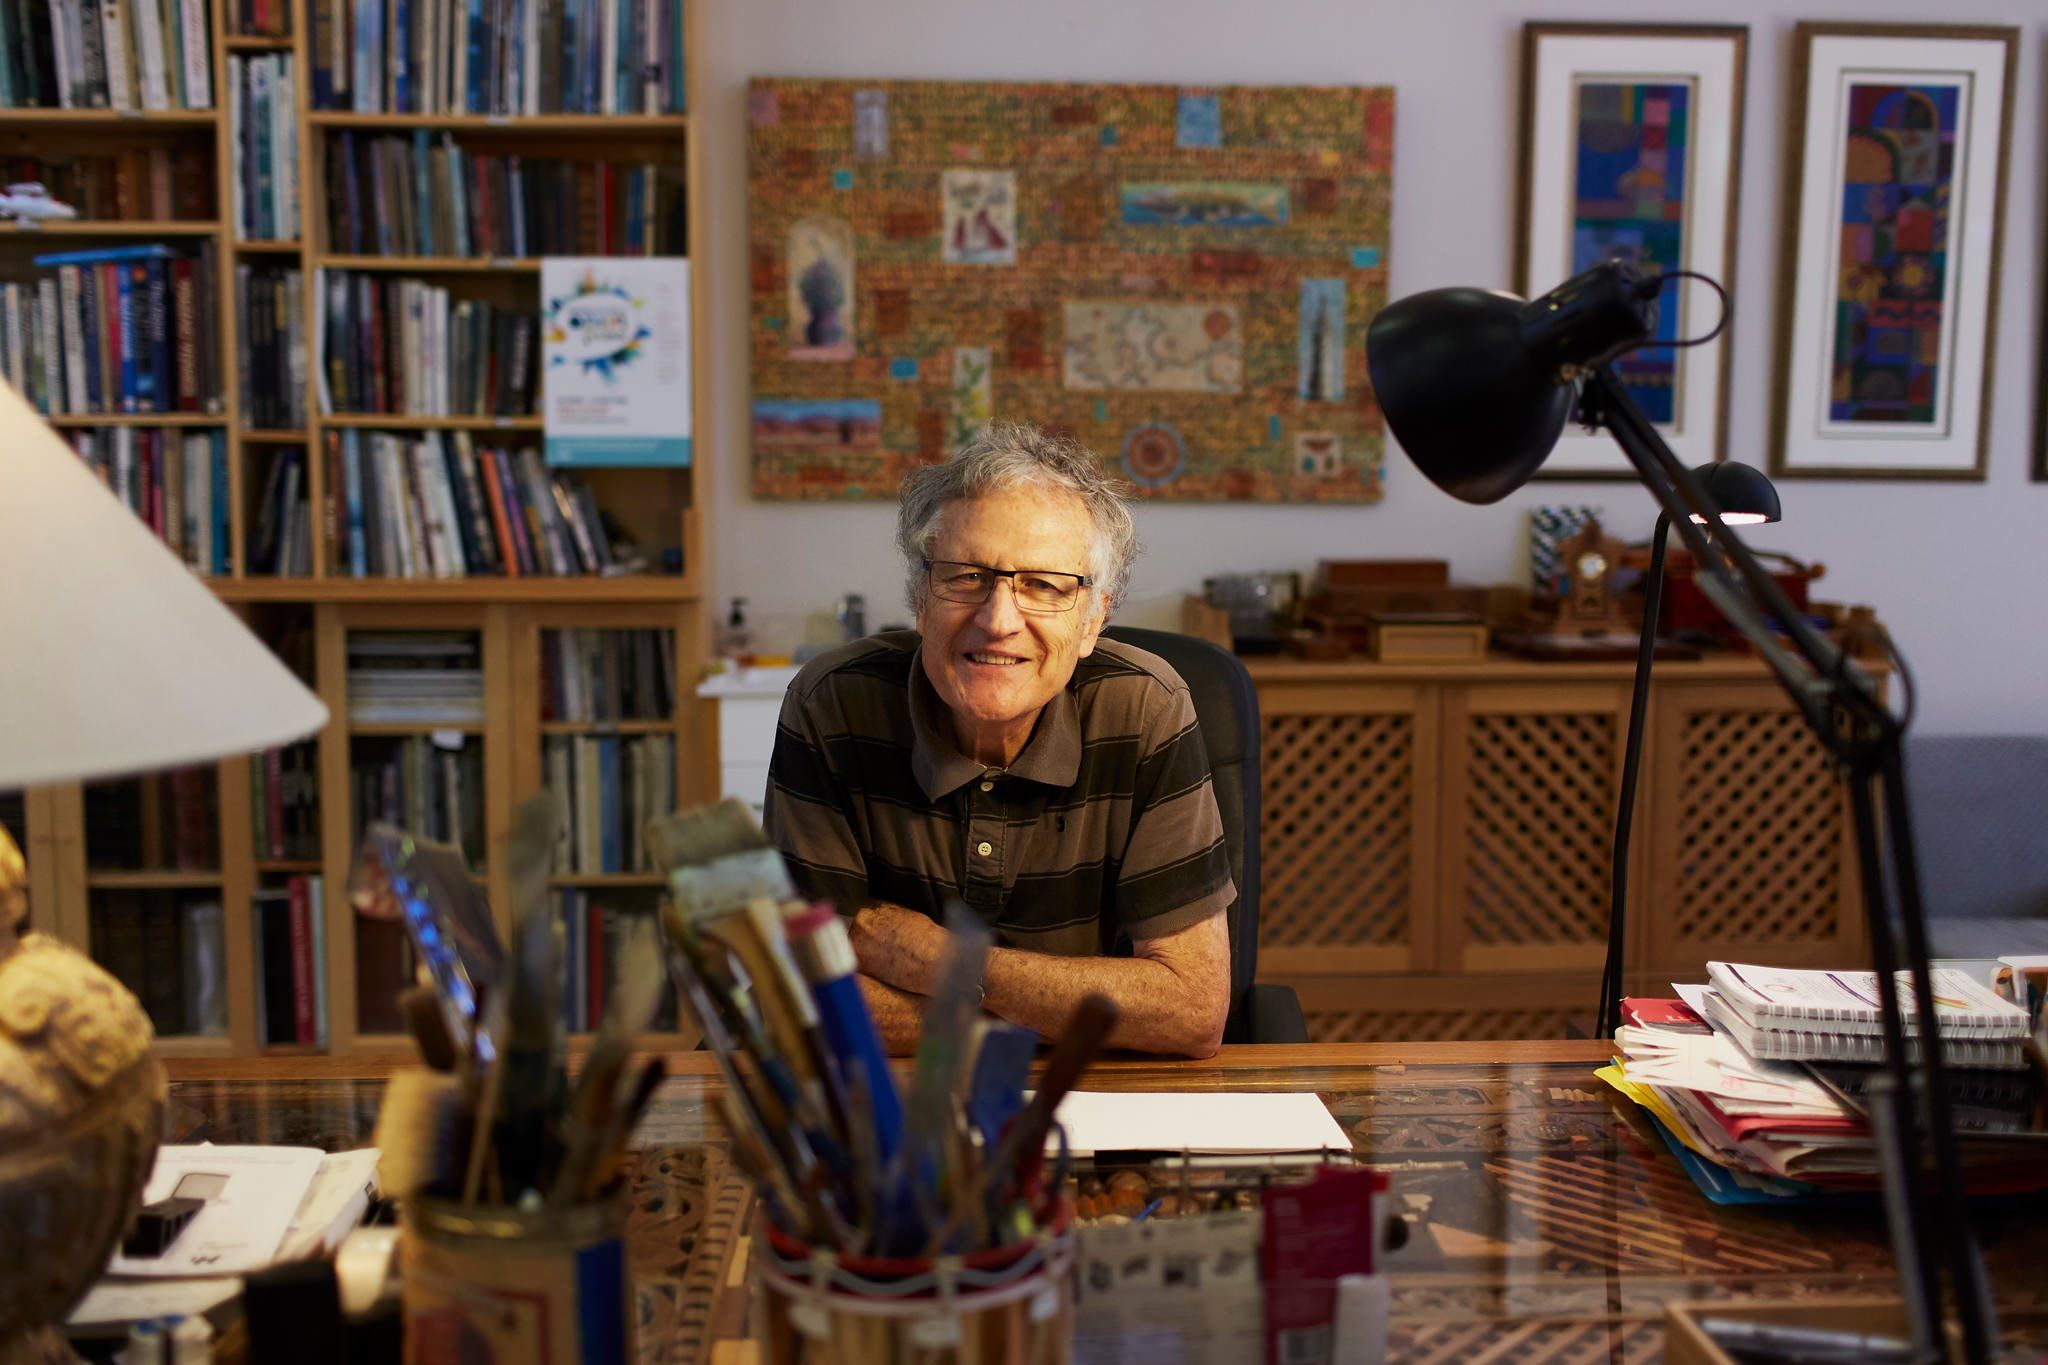 Acclaimed artist Leon Pericles in his Margaret River studio. Credit Tim Campbell.